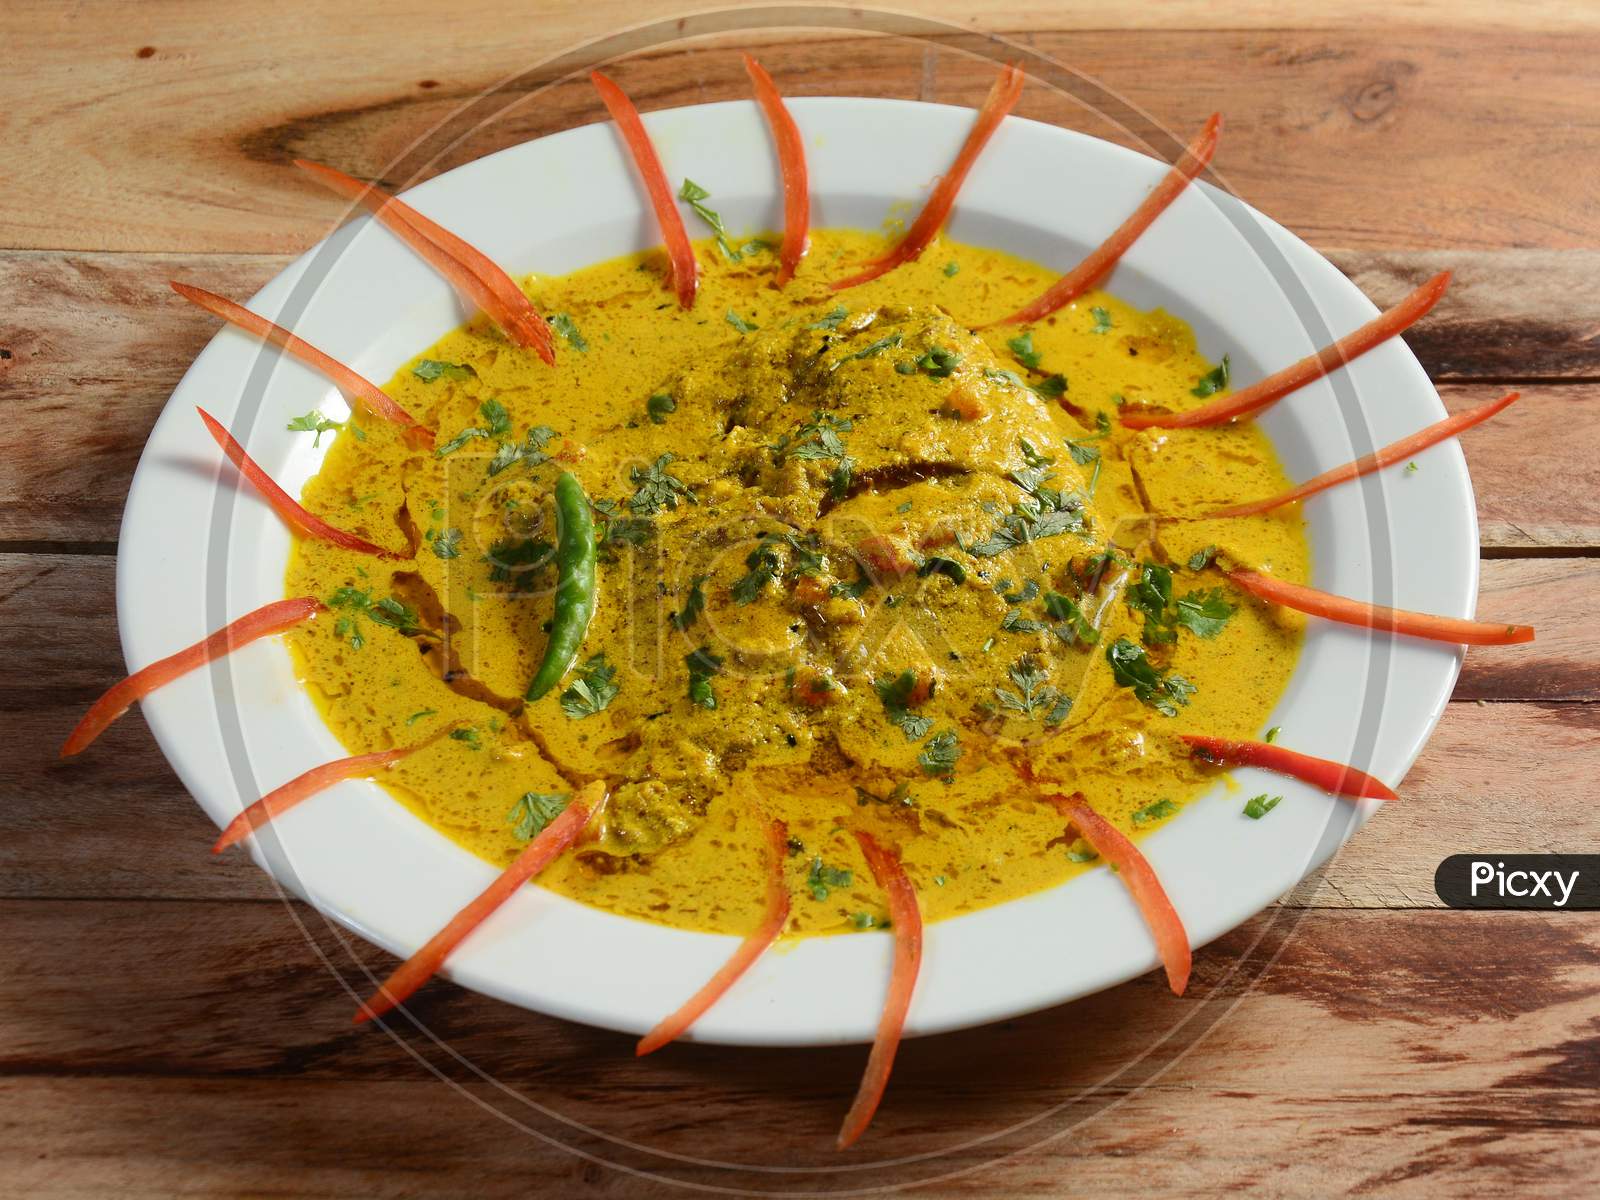 Spicy Hot Kerala Masala Fish Curry Prepared Using Coconut Milk And Spices, Pomfret Fish In South India Style Served On A Ceramic White Plate, Selective Focus